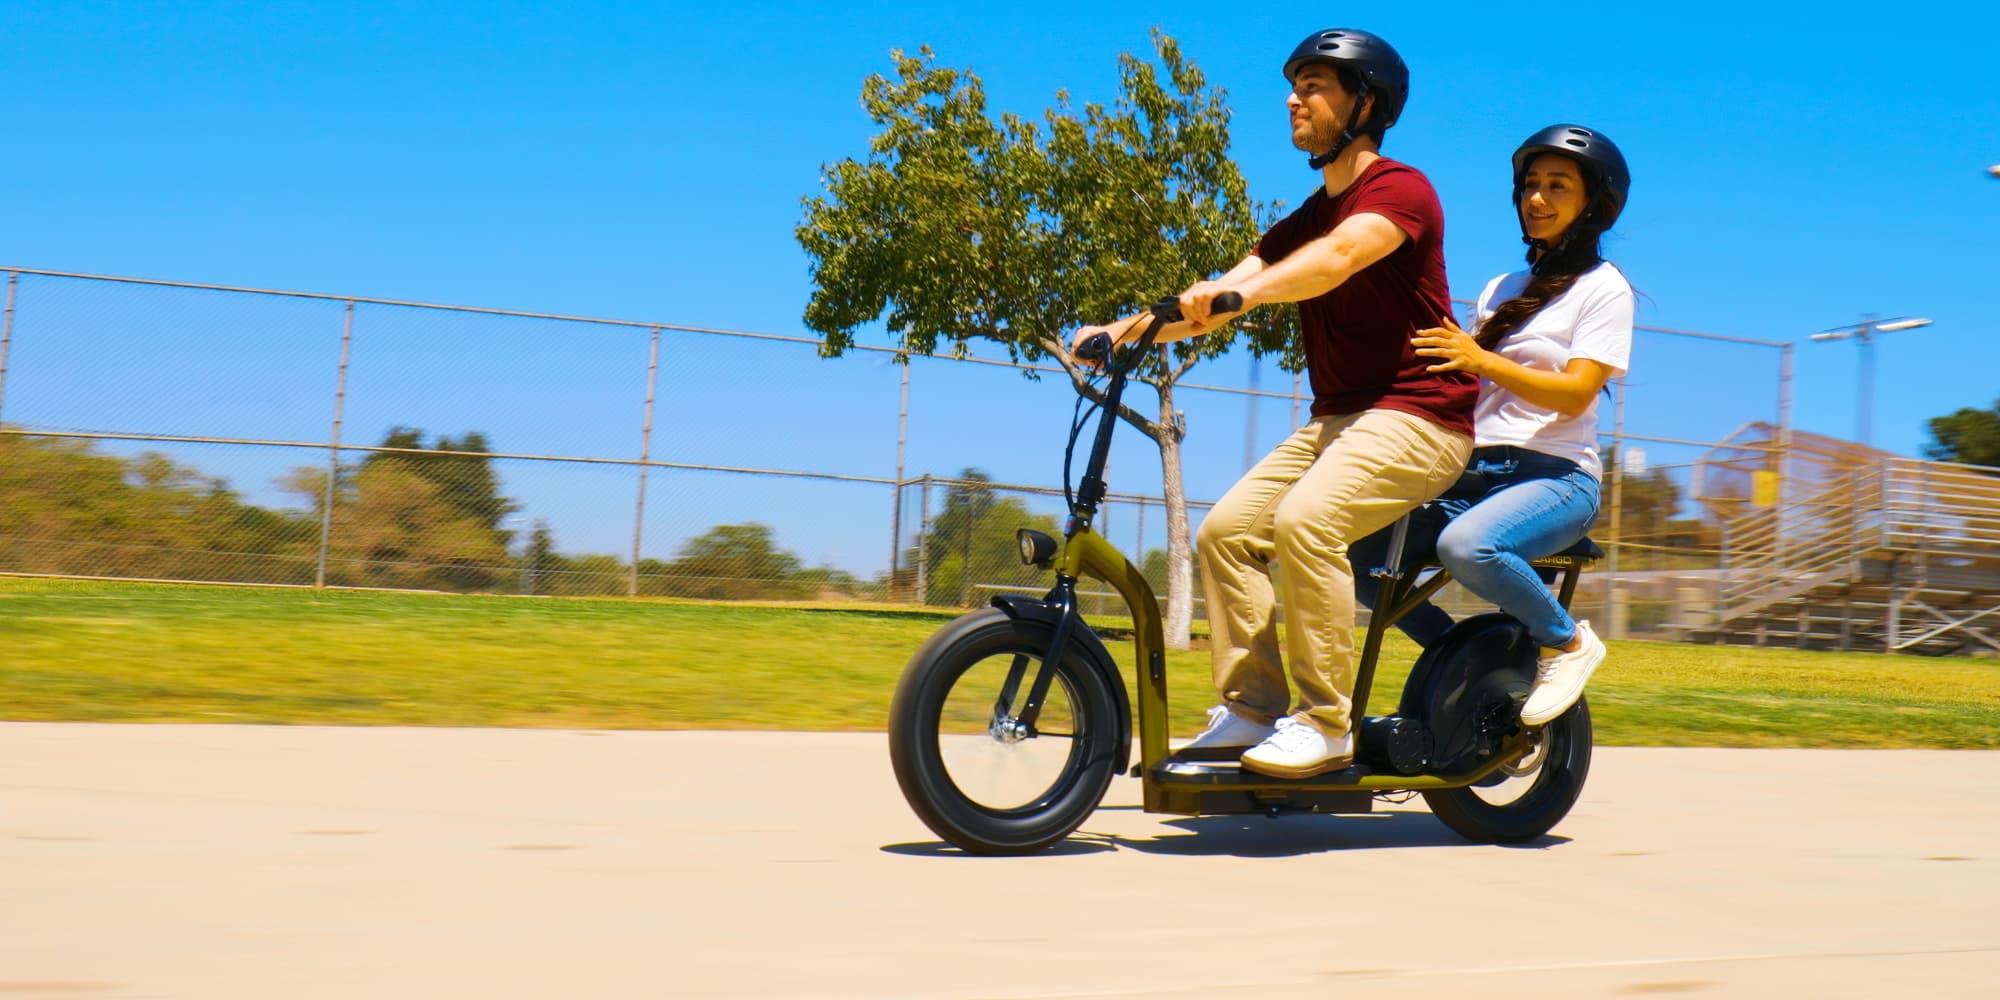 EcoSmart Cargo 1,000W electric scooter carries two